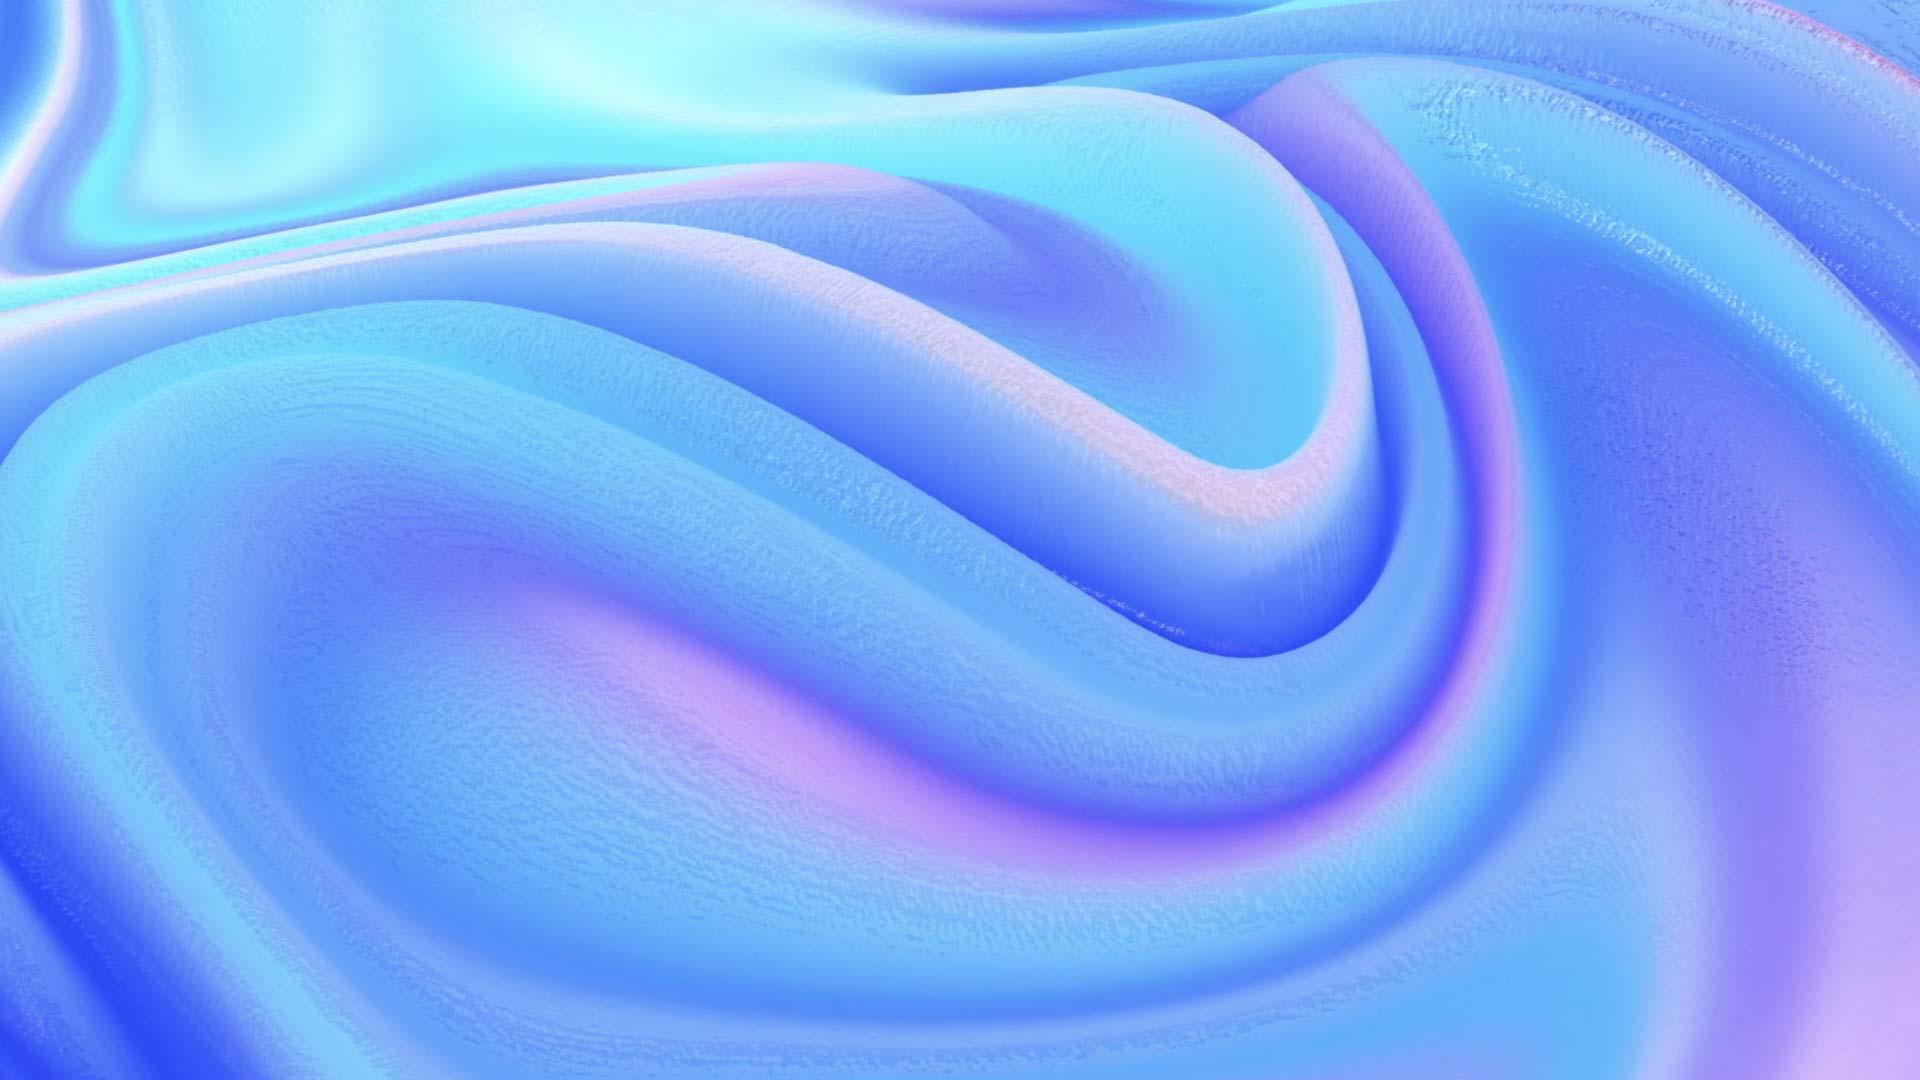 An abstract background image